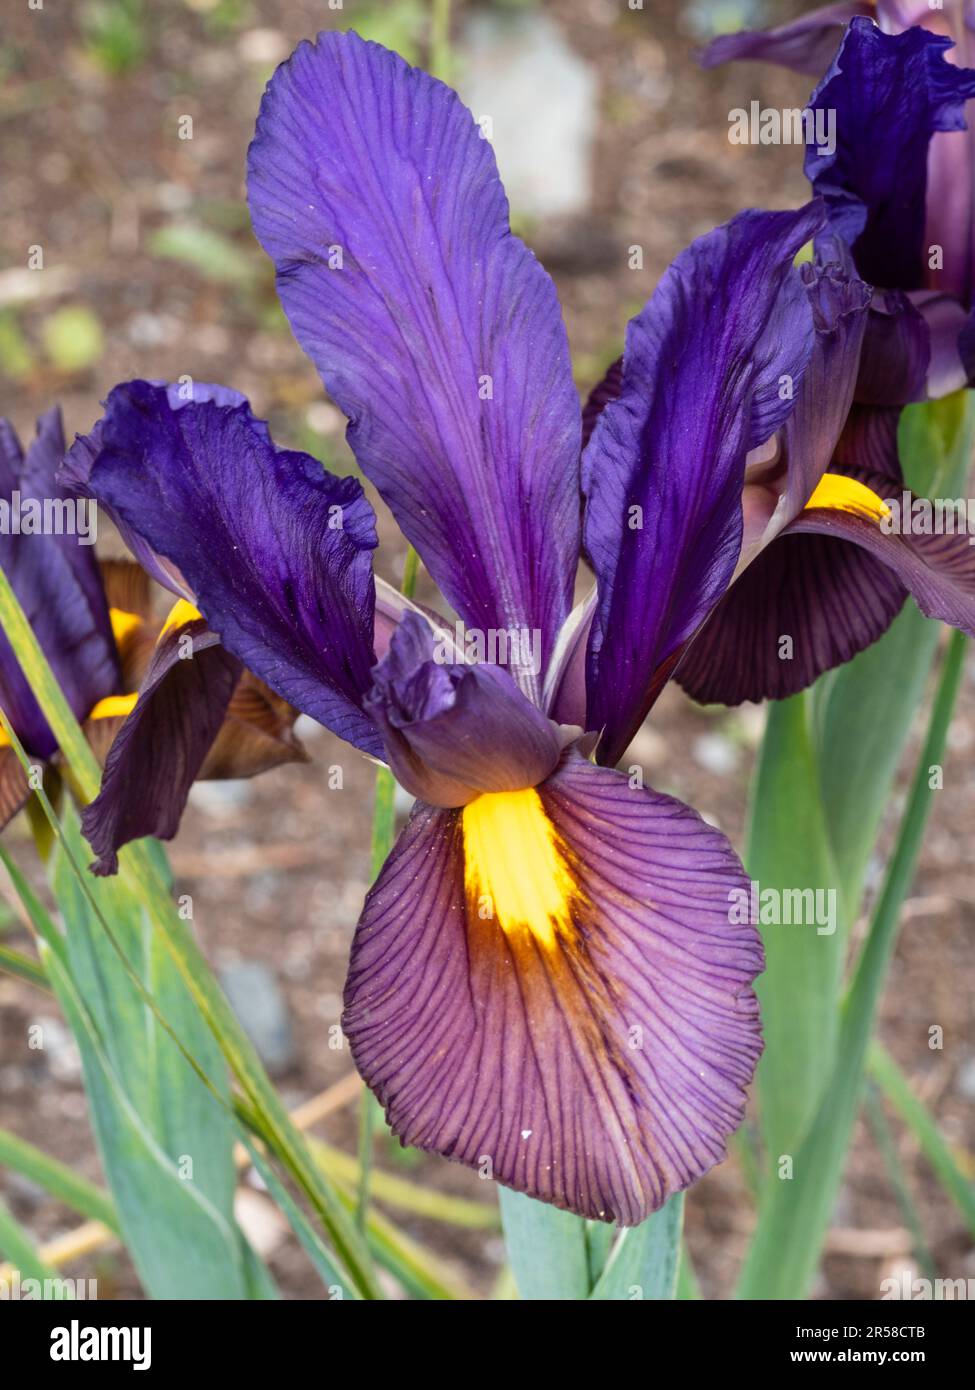 Blue standards and bronze falls in a flower of the late spring blooming dutch iris, Iris x hollandica 'Tigereye' Stock Photo